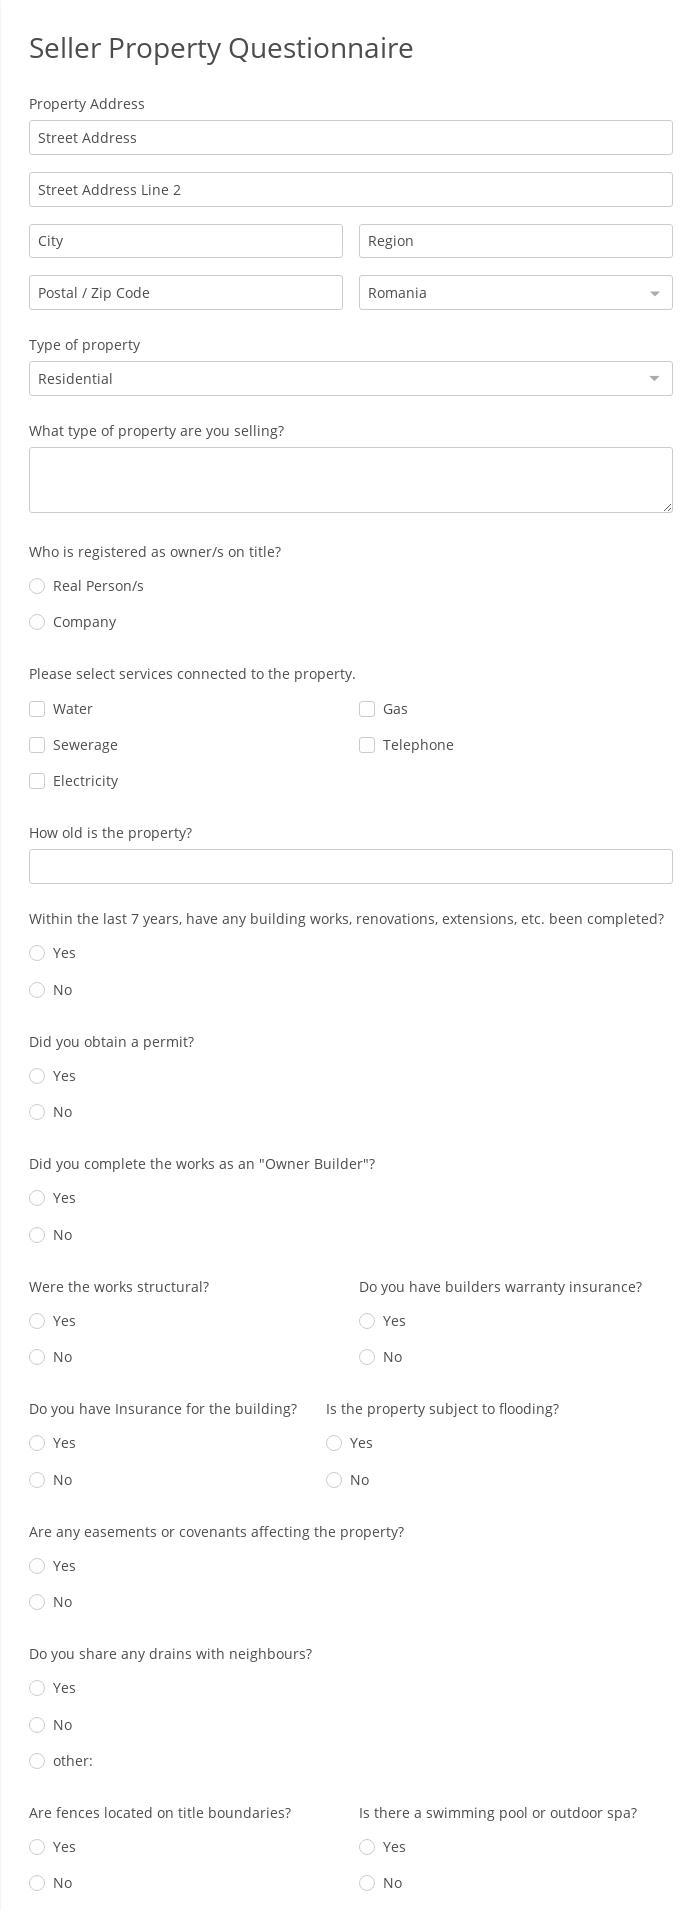 Seller Property Questionnaire